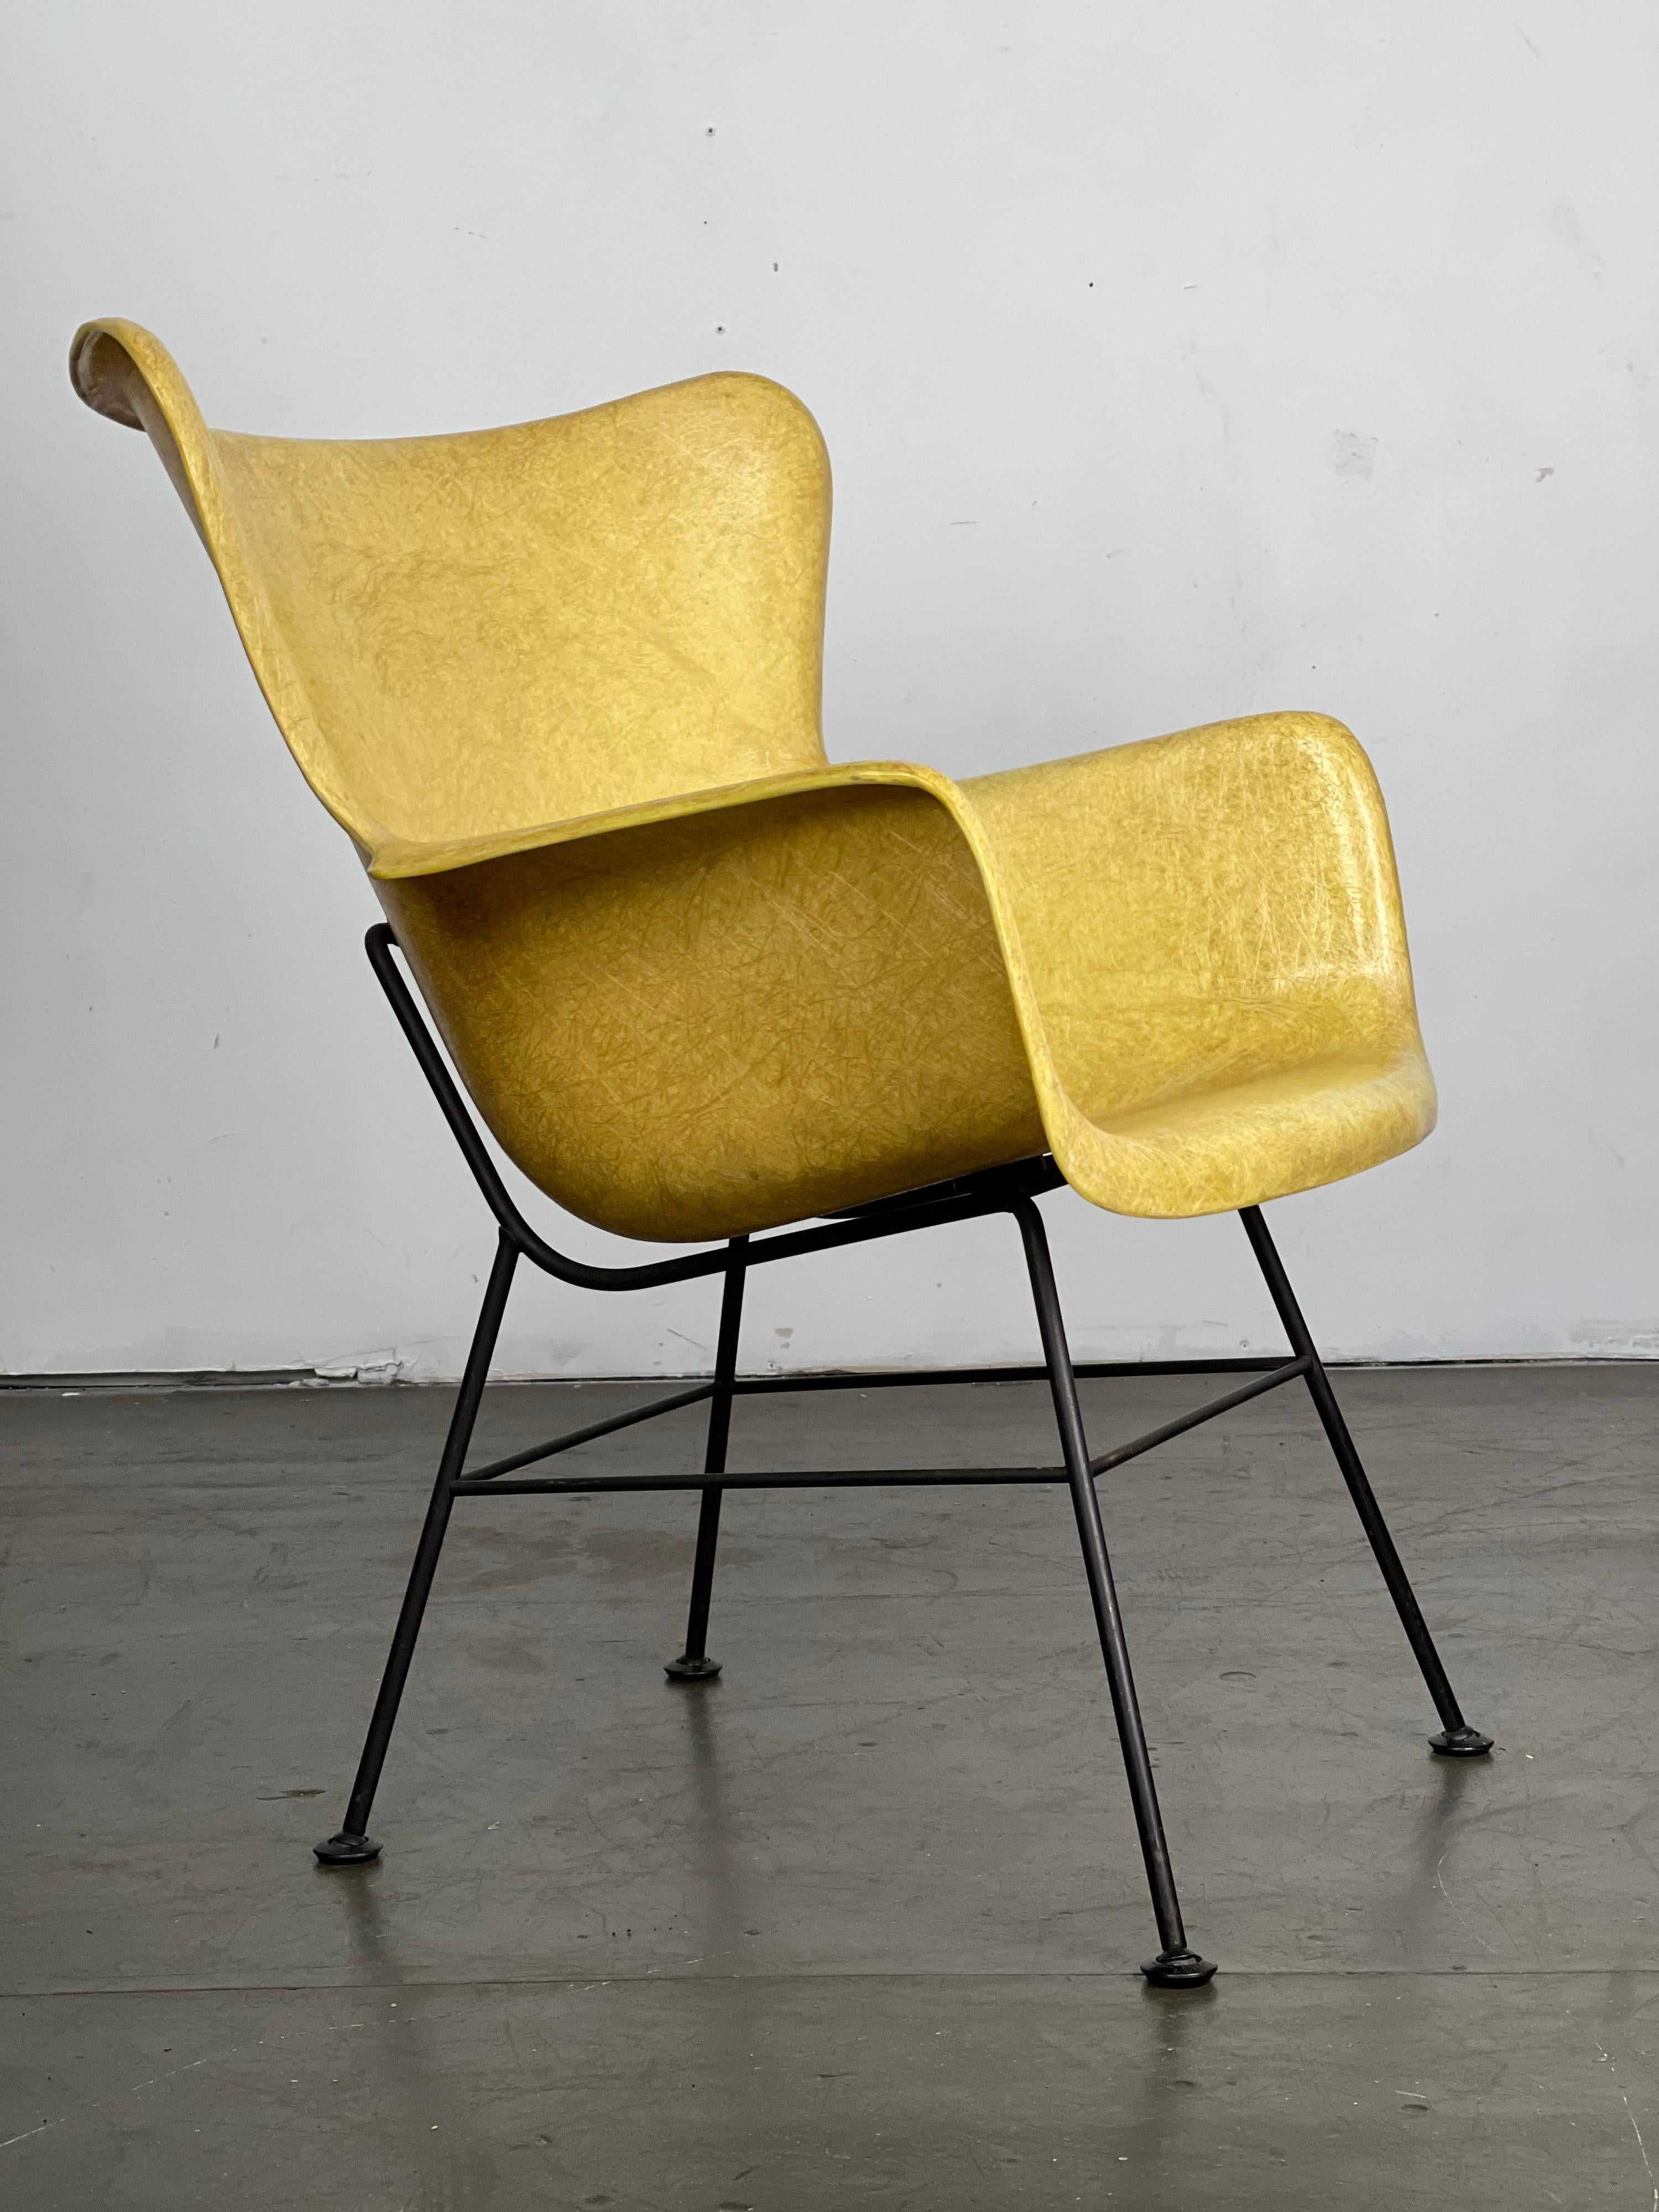 Excellent original condition lounge chair in fiberglass and iron by Lawrence Peabody for Selig - with the original label which is never there! I love these chairs because they are much less ubiquitous than the Eames shell chair, as well as more